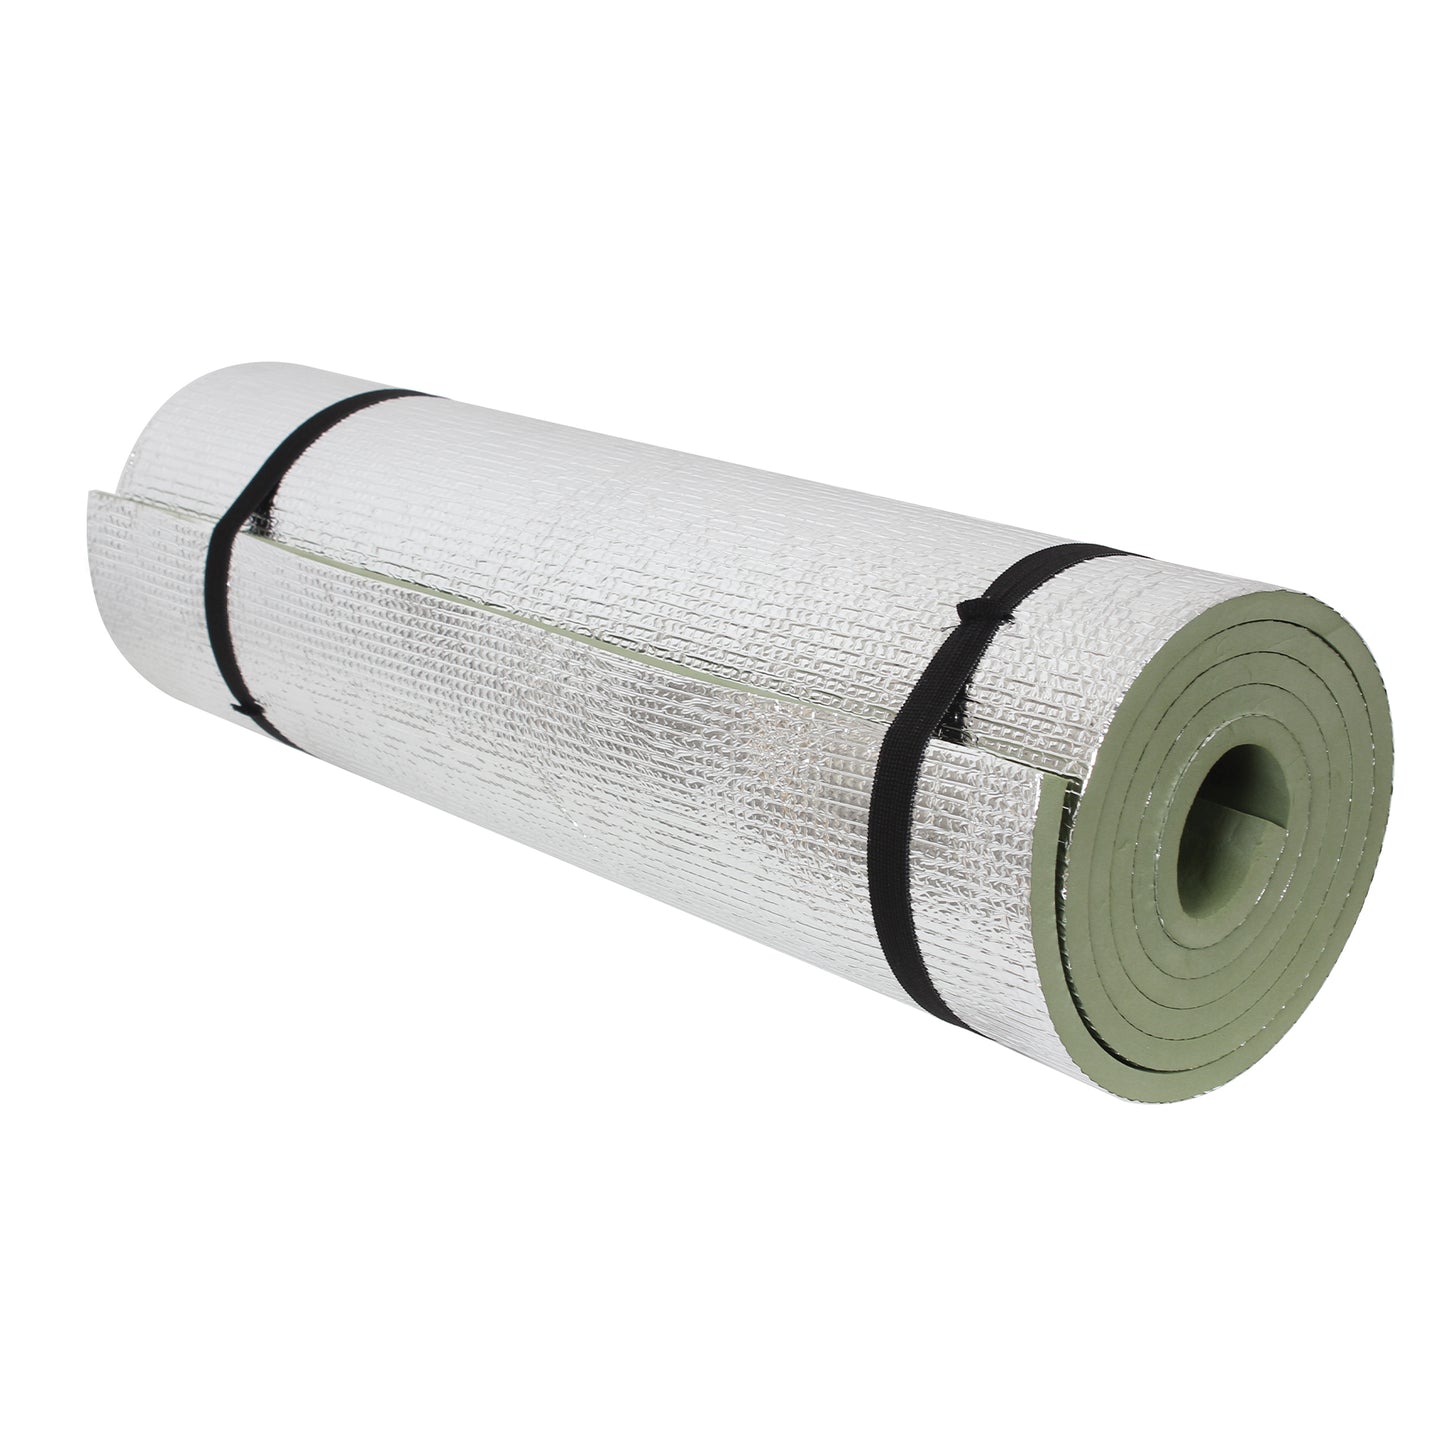 Thermal Reflective Sleeping Pad with Ties - Olive Drab